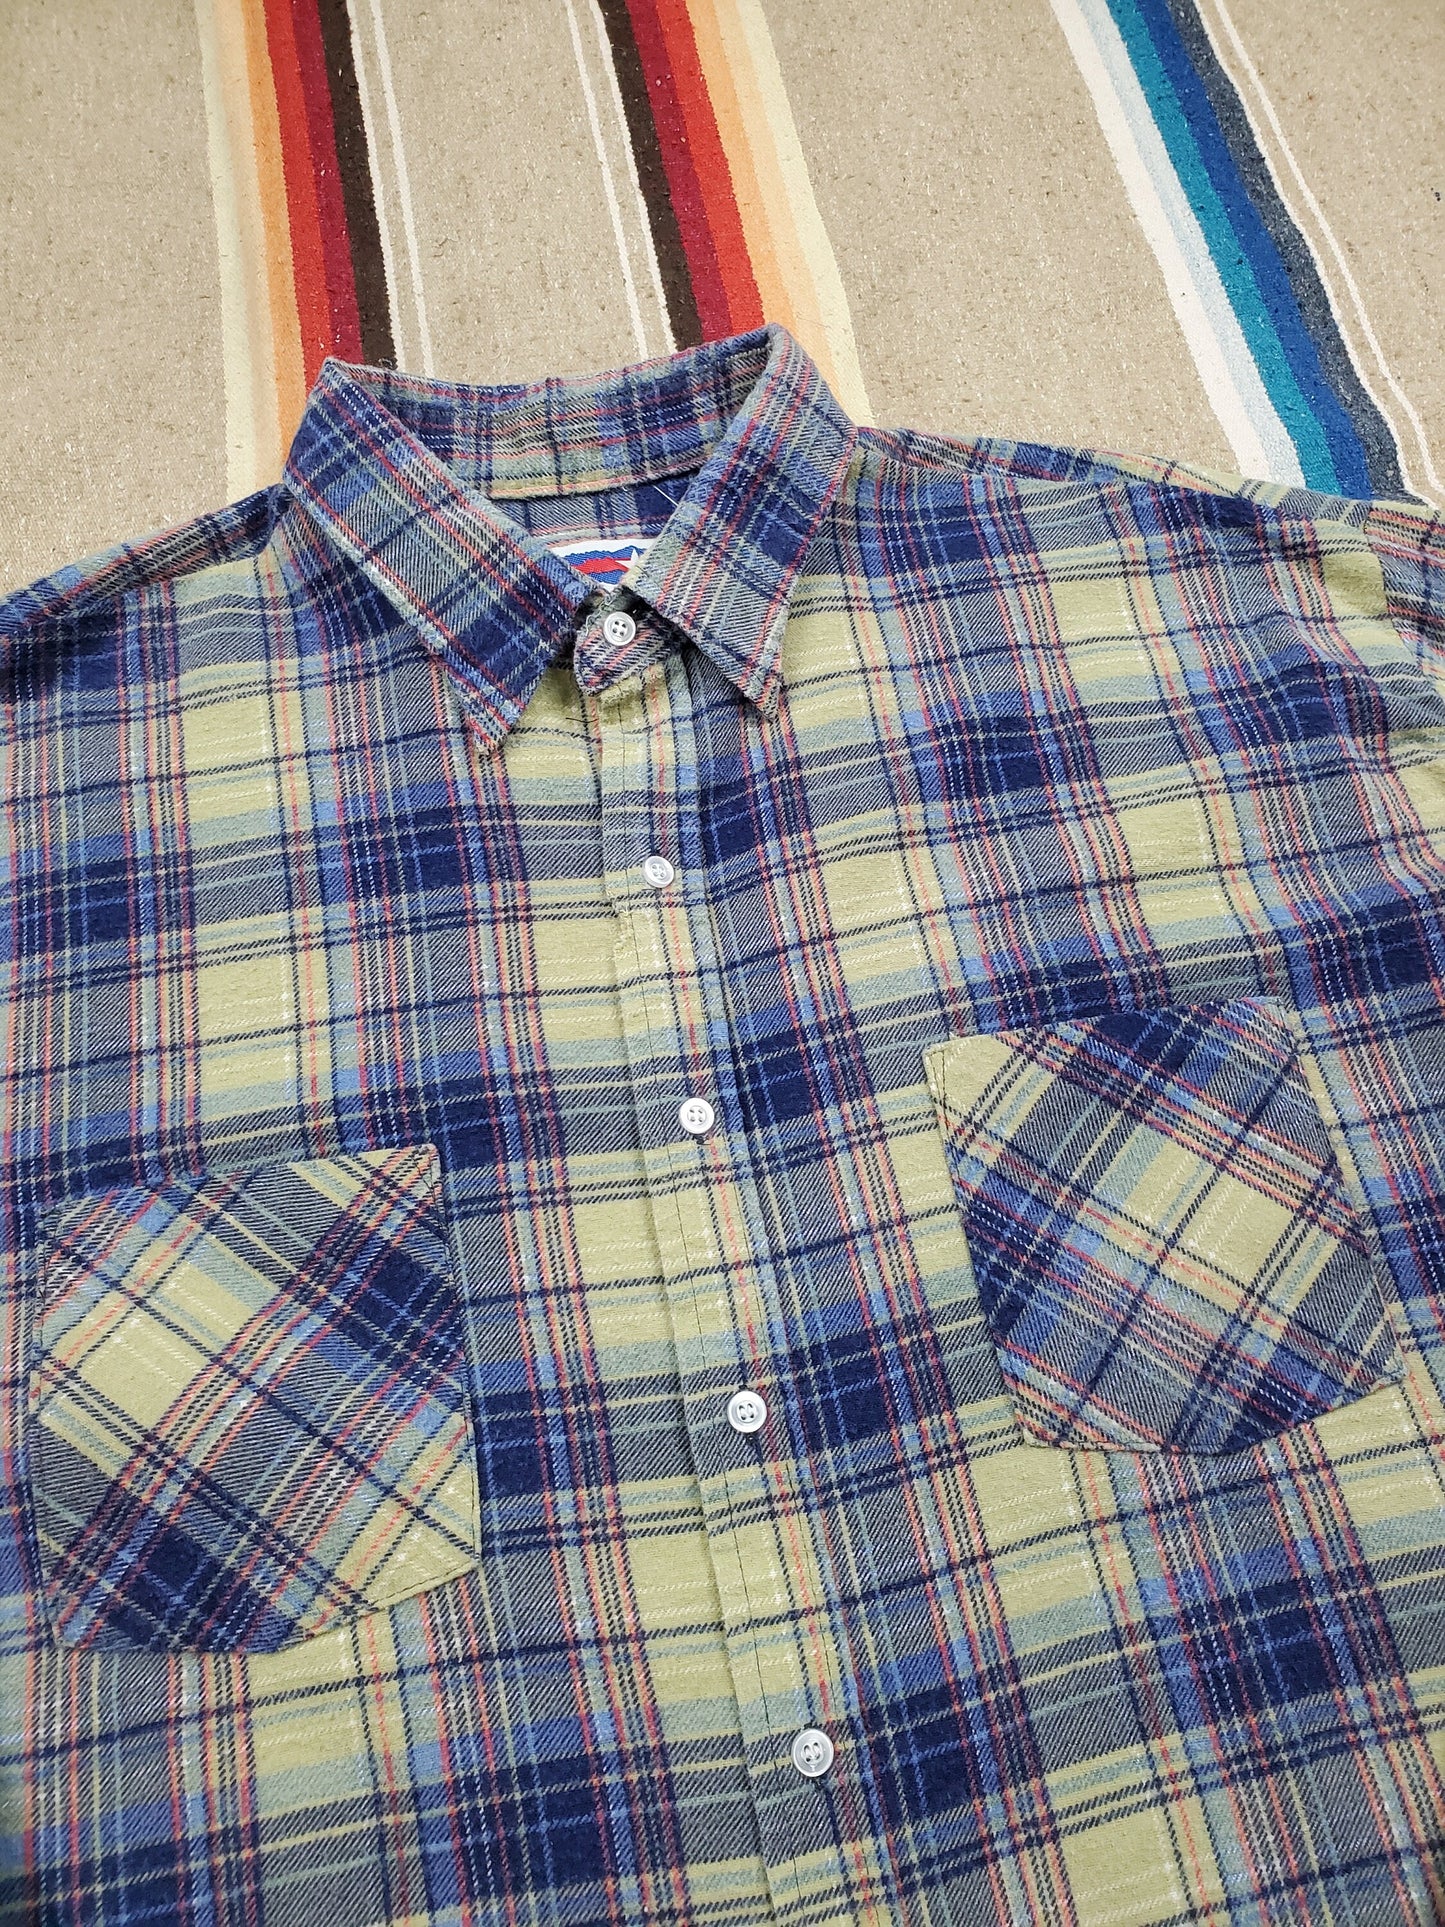 1990s American Edition Printed Cotton Flannel Shirt Made in USA Size XXL